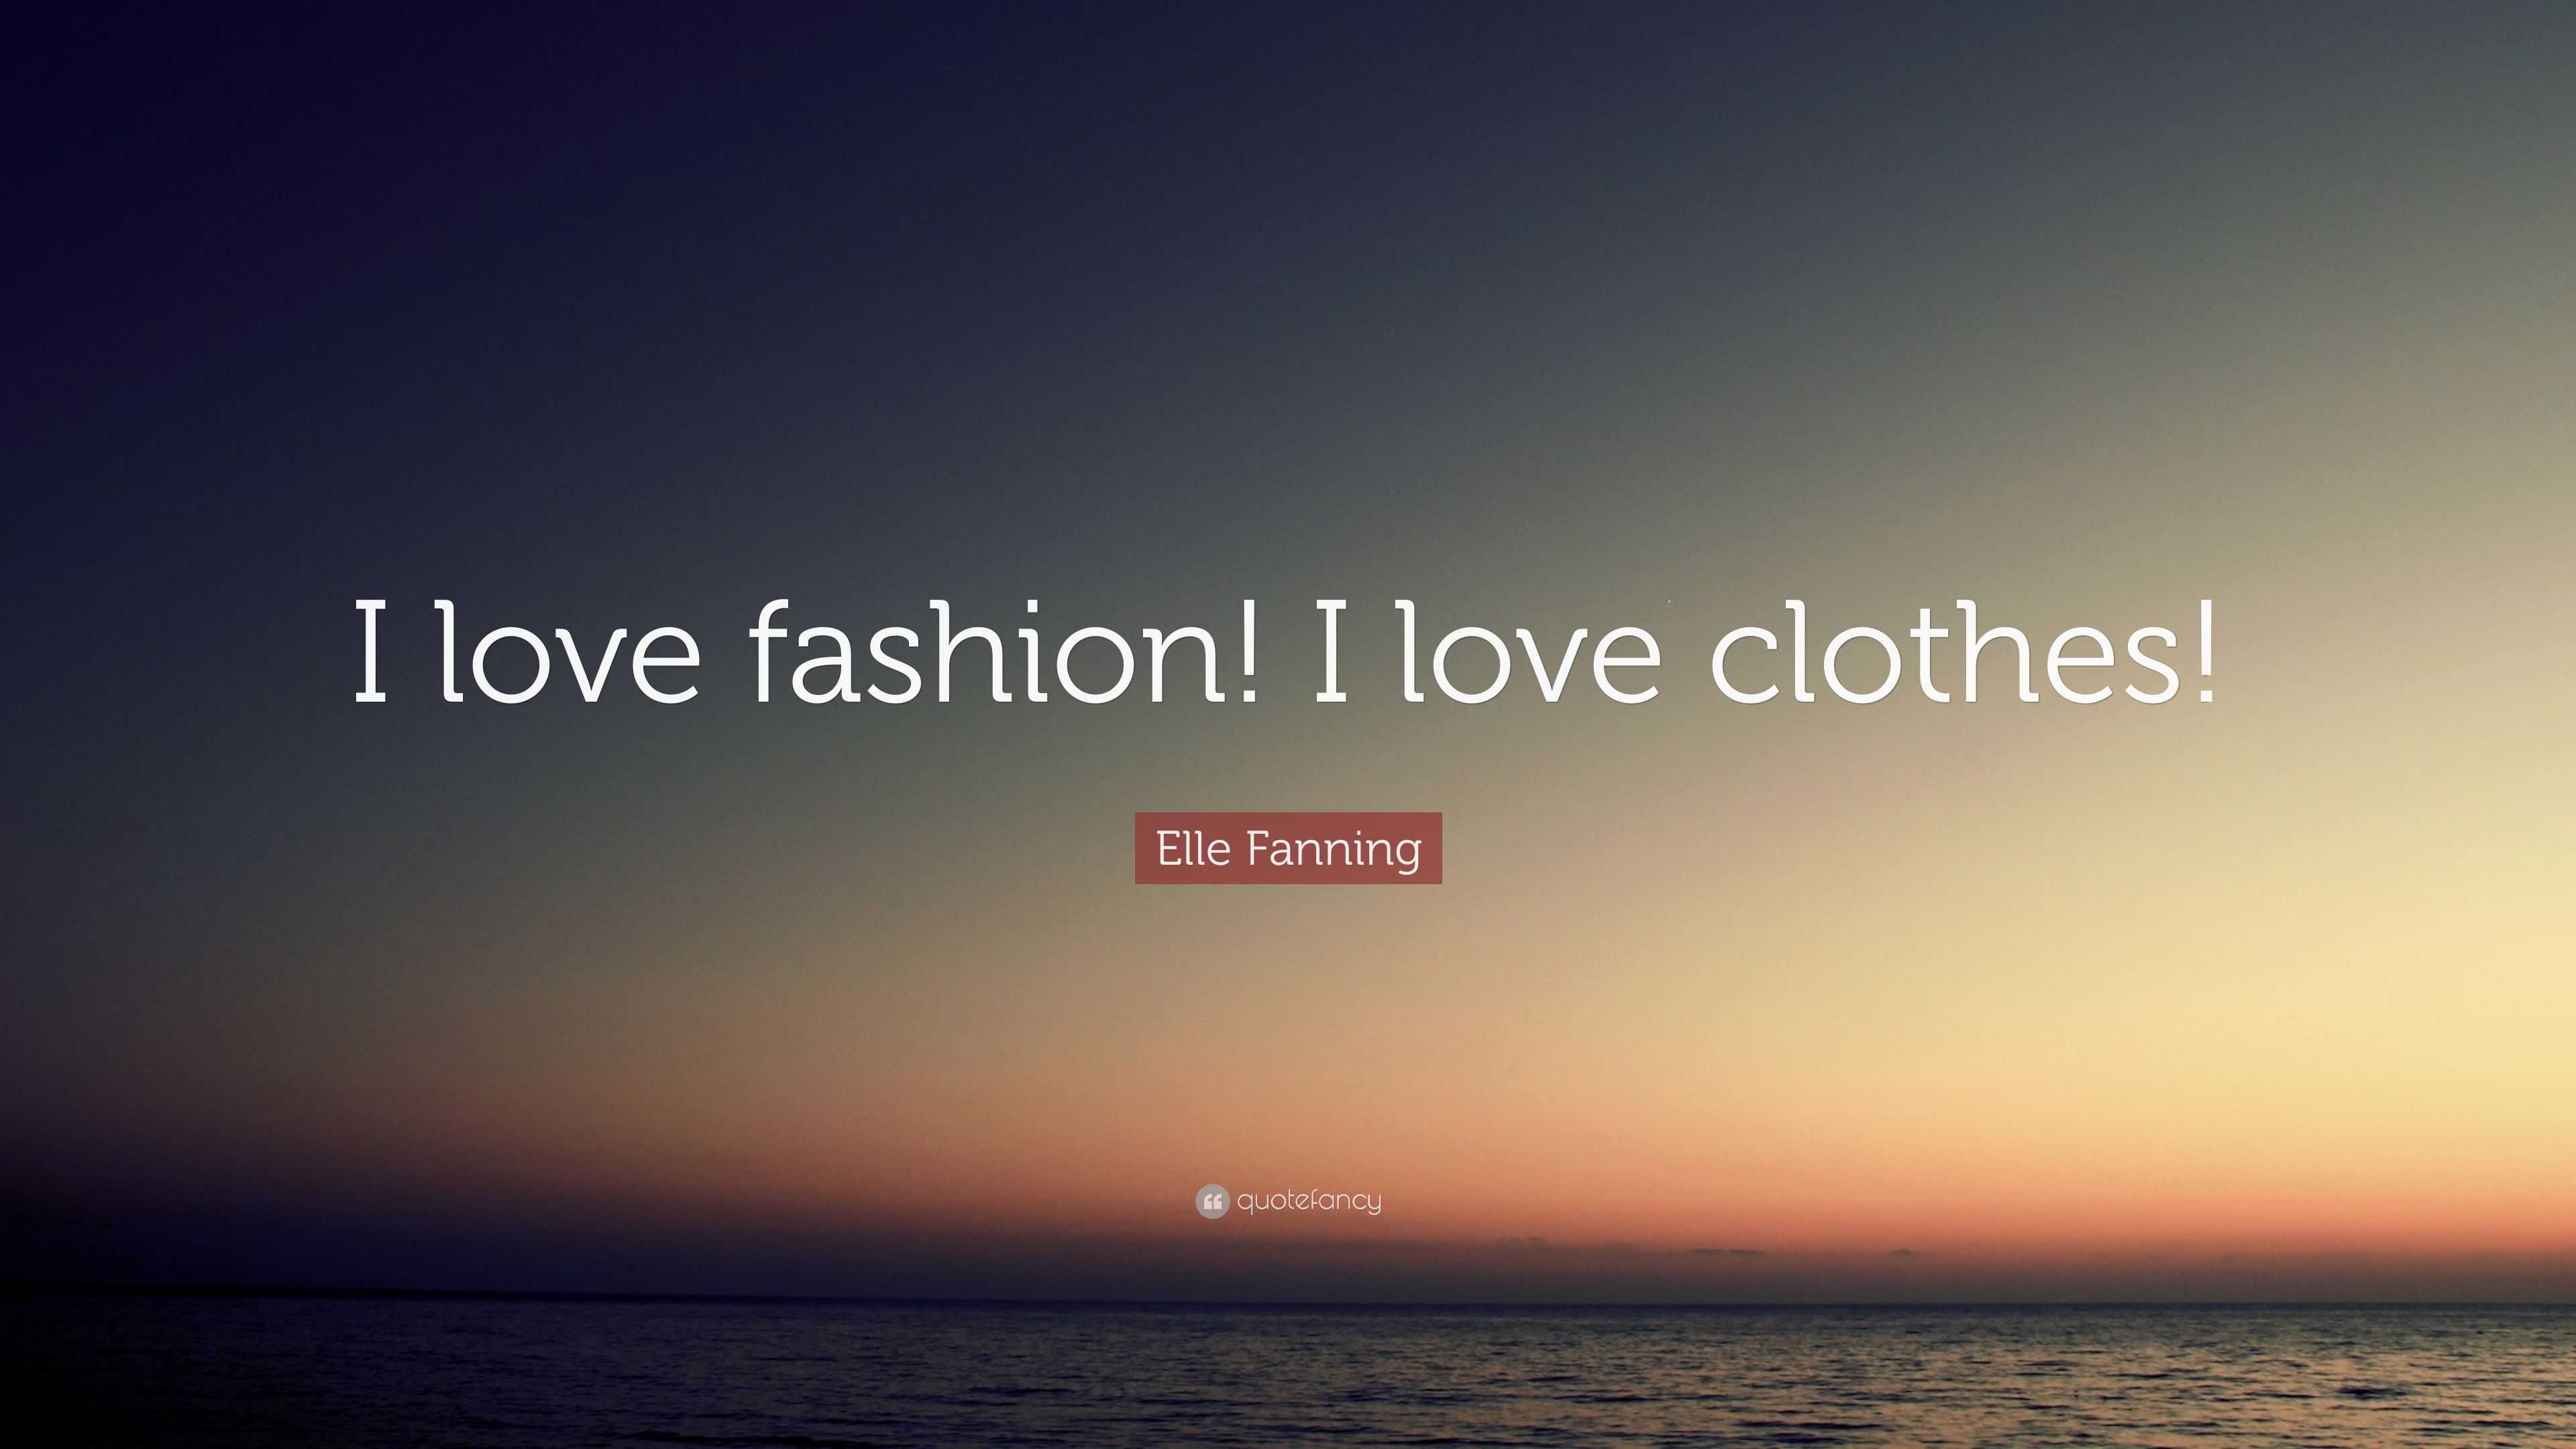 Love Clothes